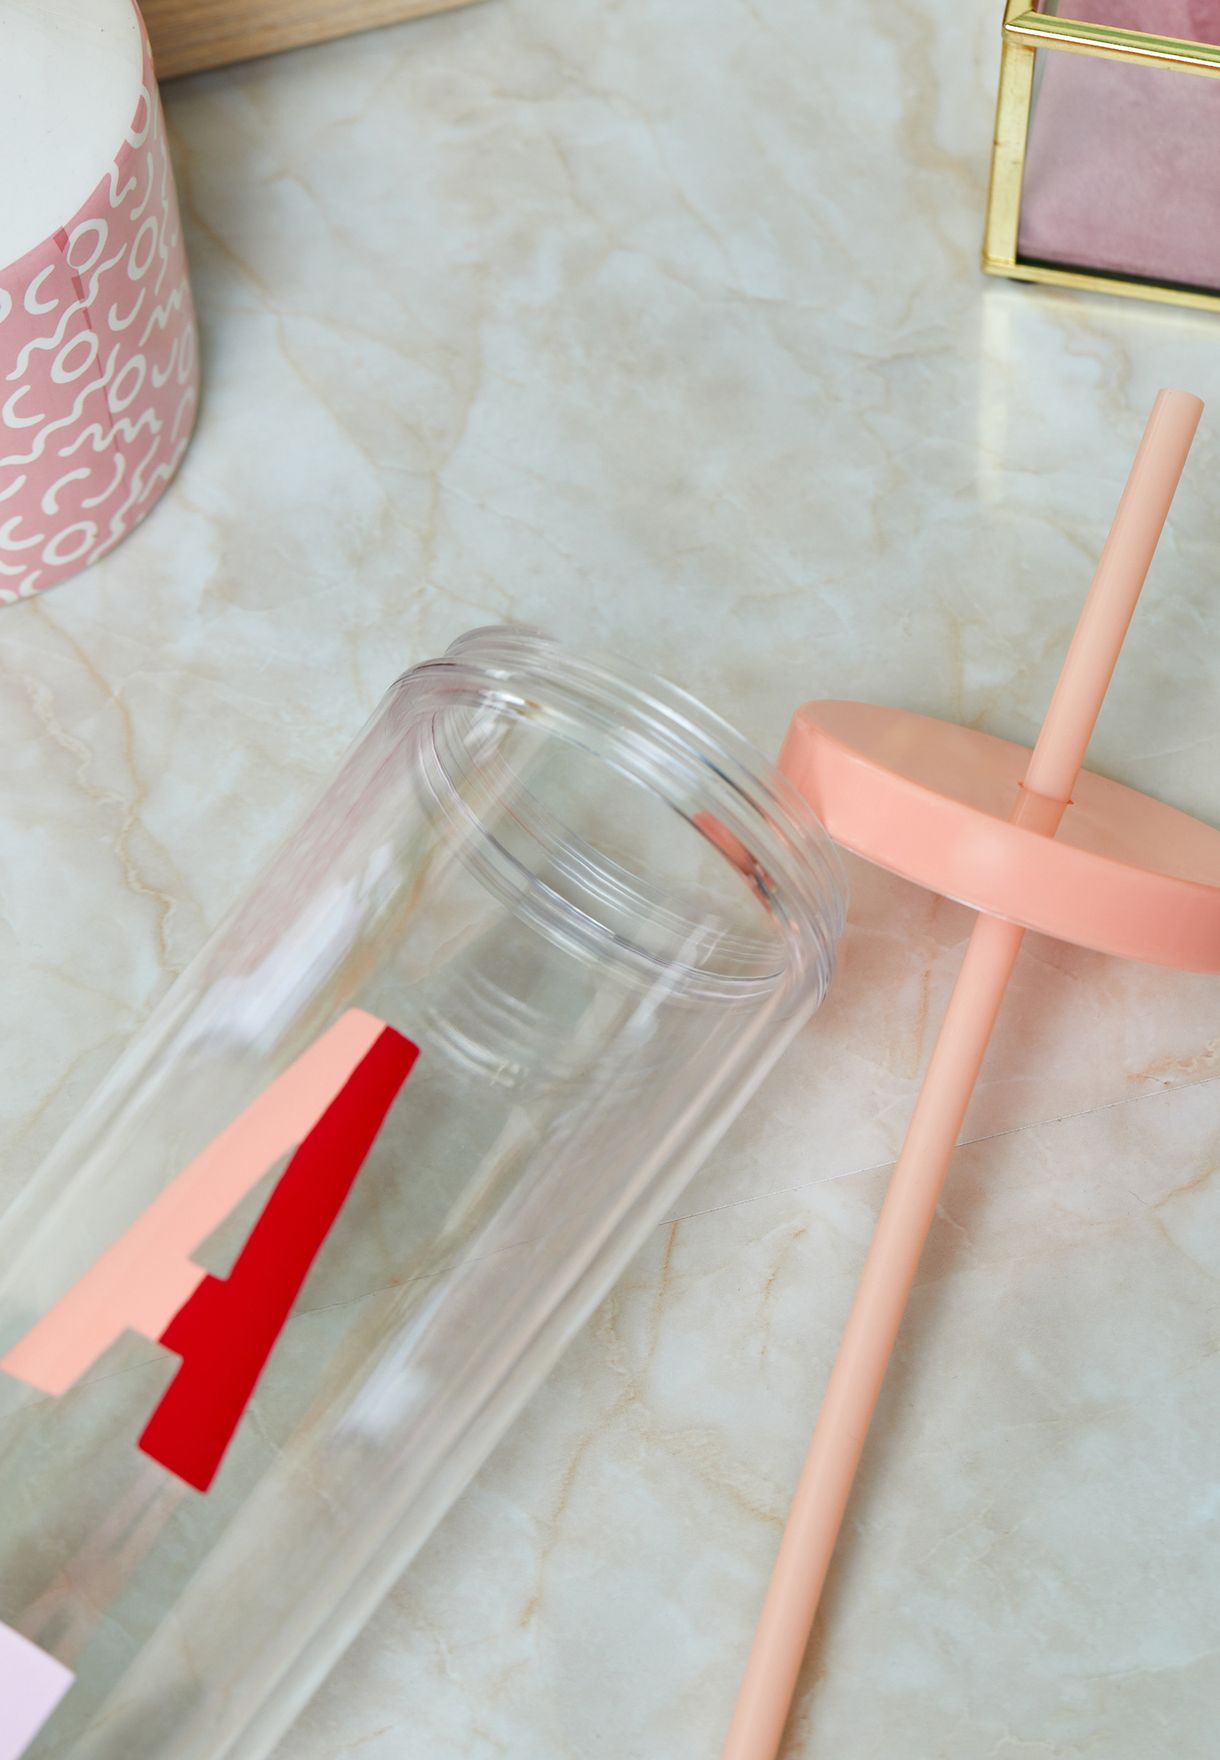 Monogram Tumbler With Straw - A